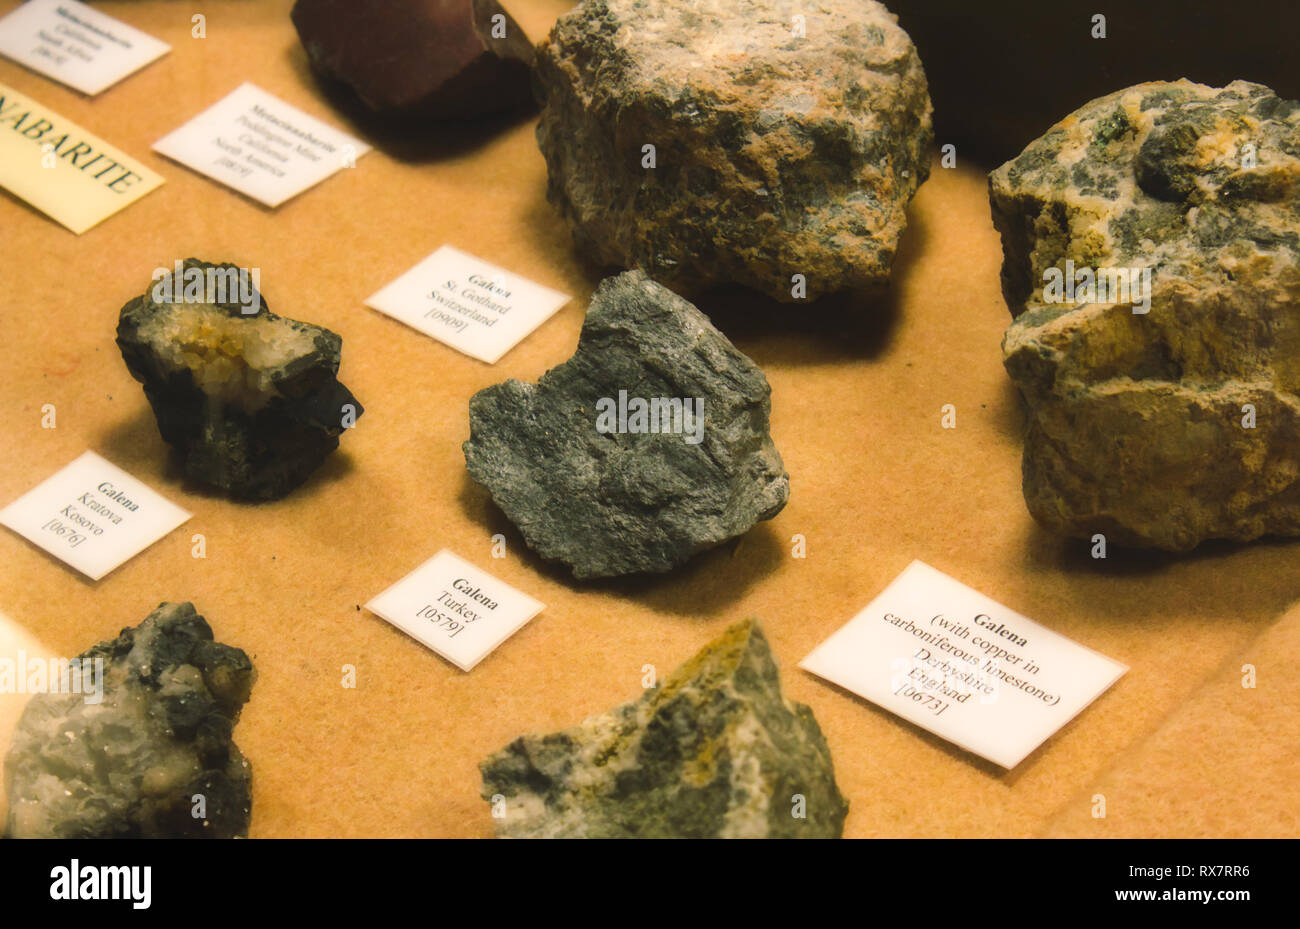 Collection of Galena stones on display as part of a geological mineral exhibit Stock Photo